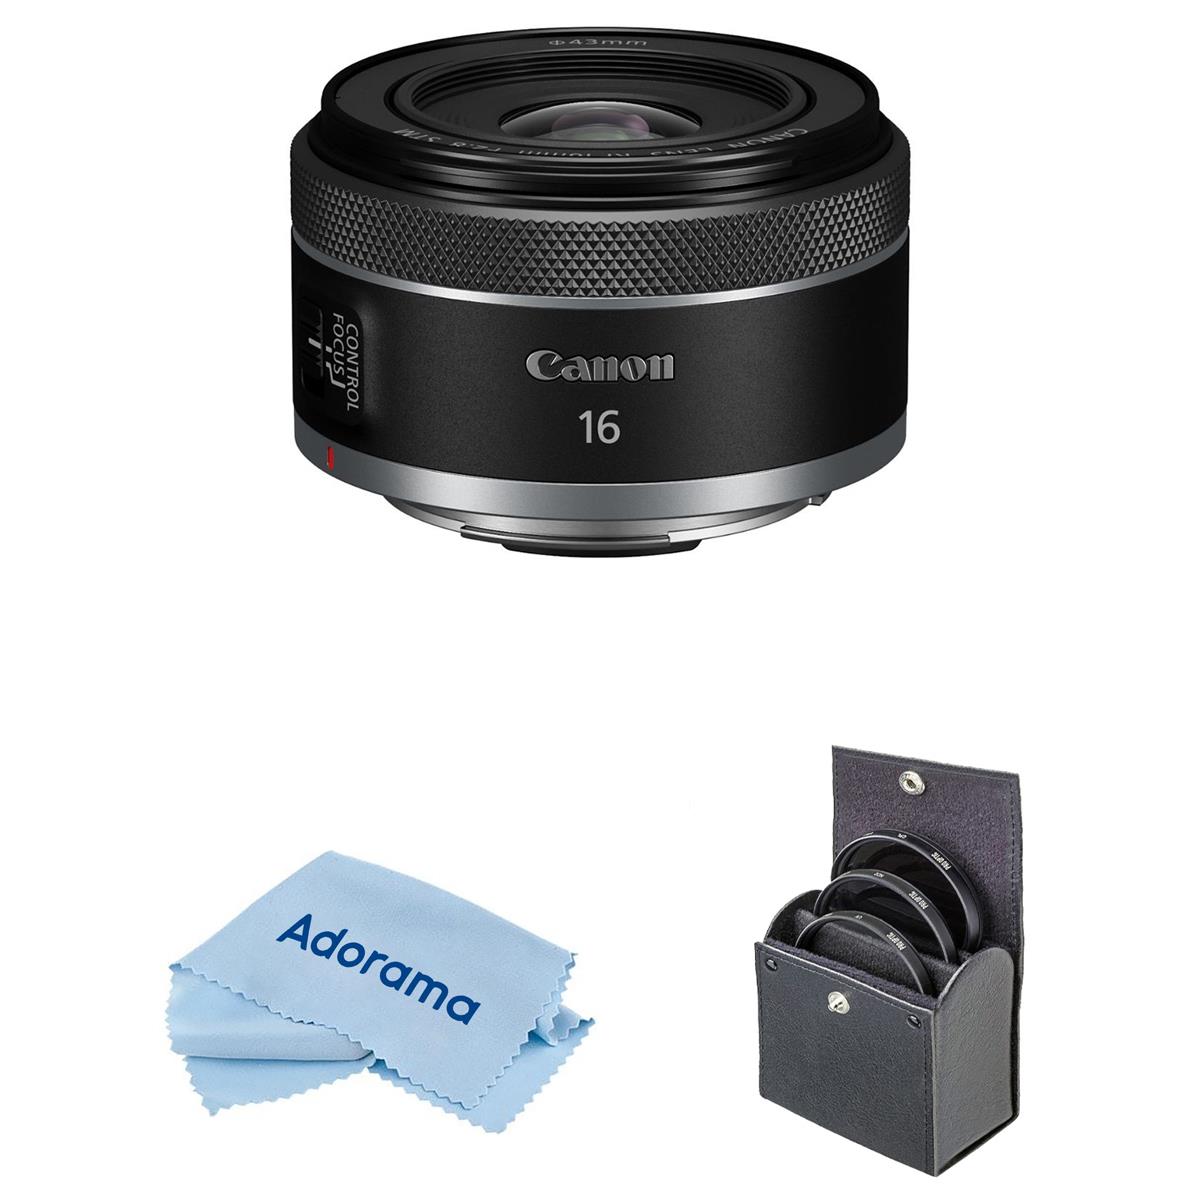 Image of Canon RF 16mm f/2.8 STM Lens with Accessories Kit